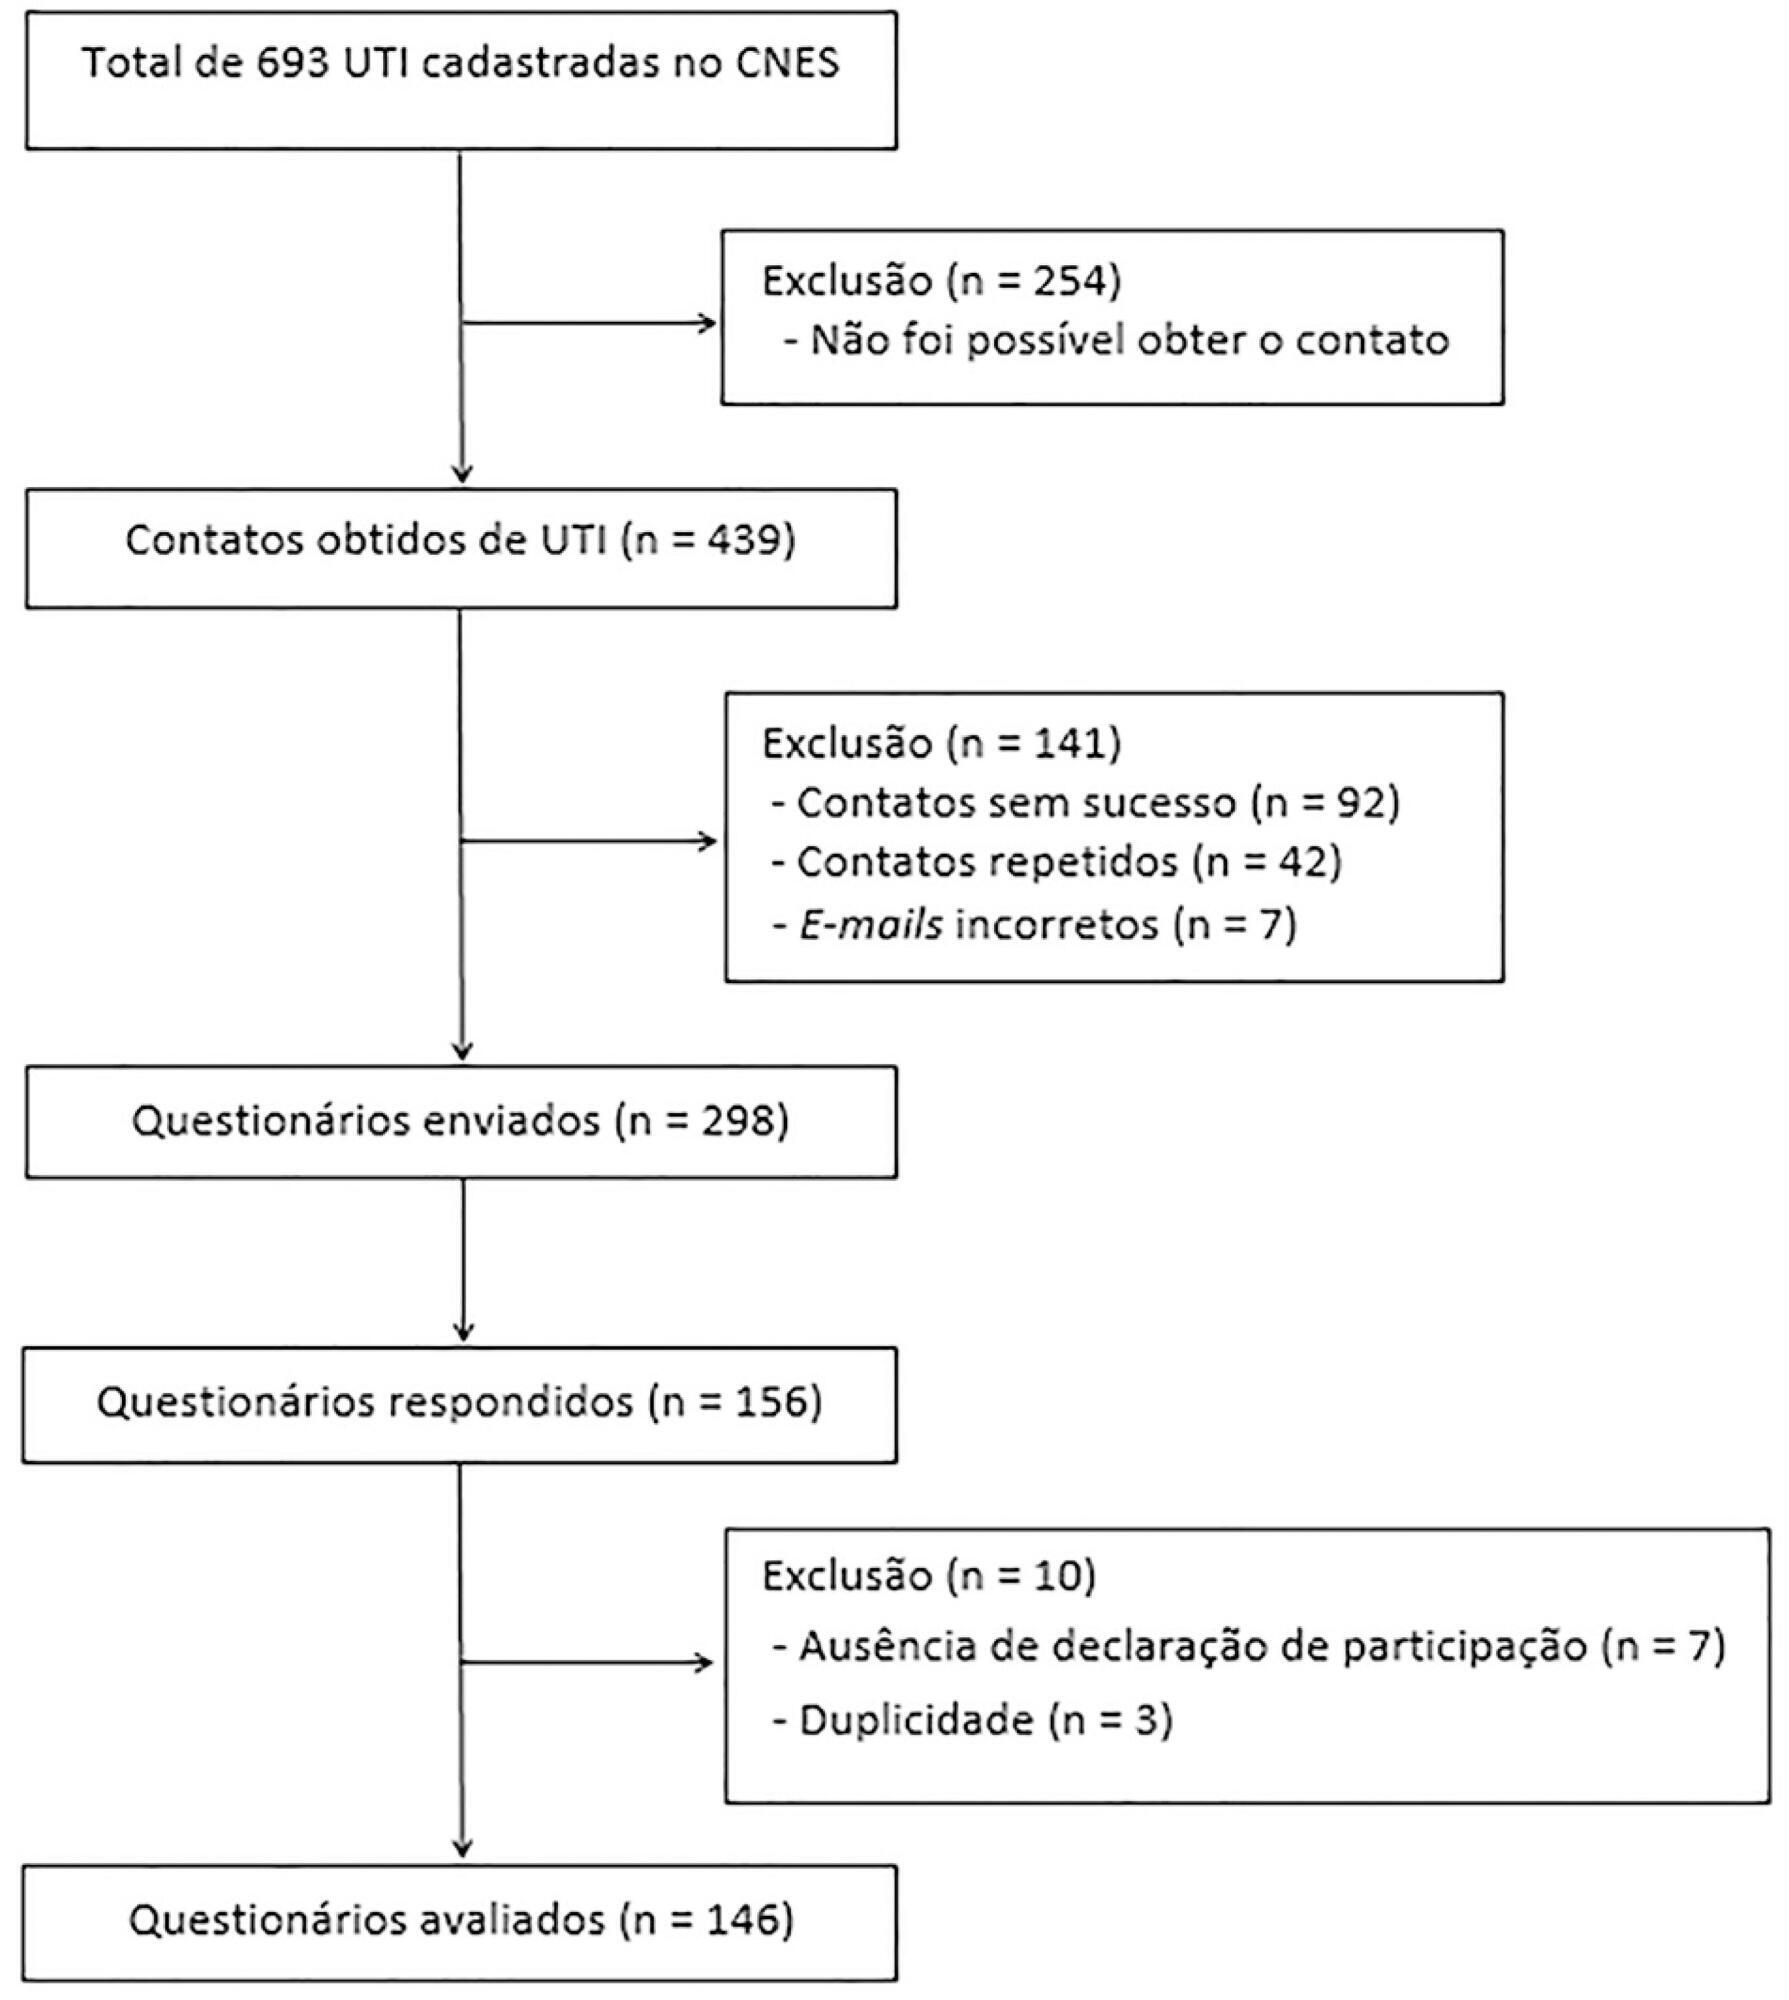 Frequency and characterization of the use of cuffed tracheal tubes in neonatal and pediatric intensive care units in Brazil